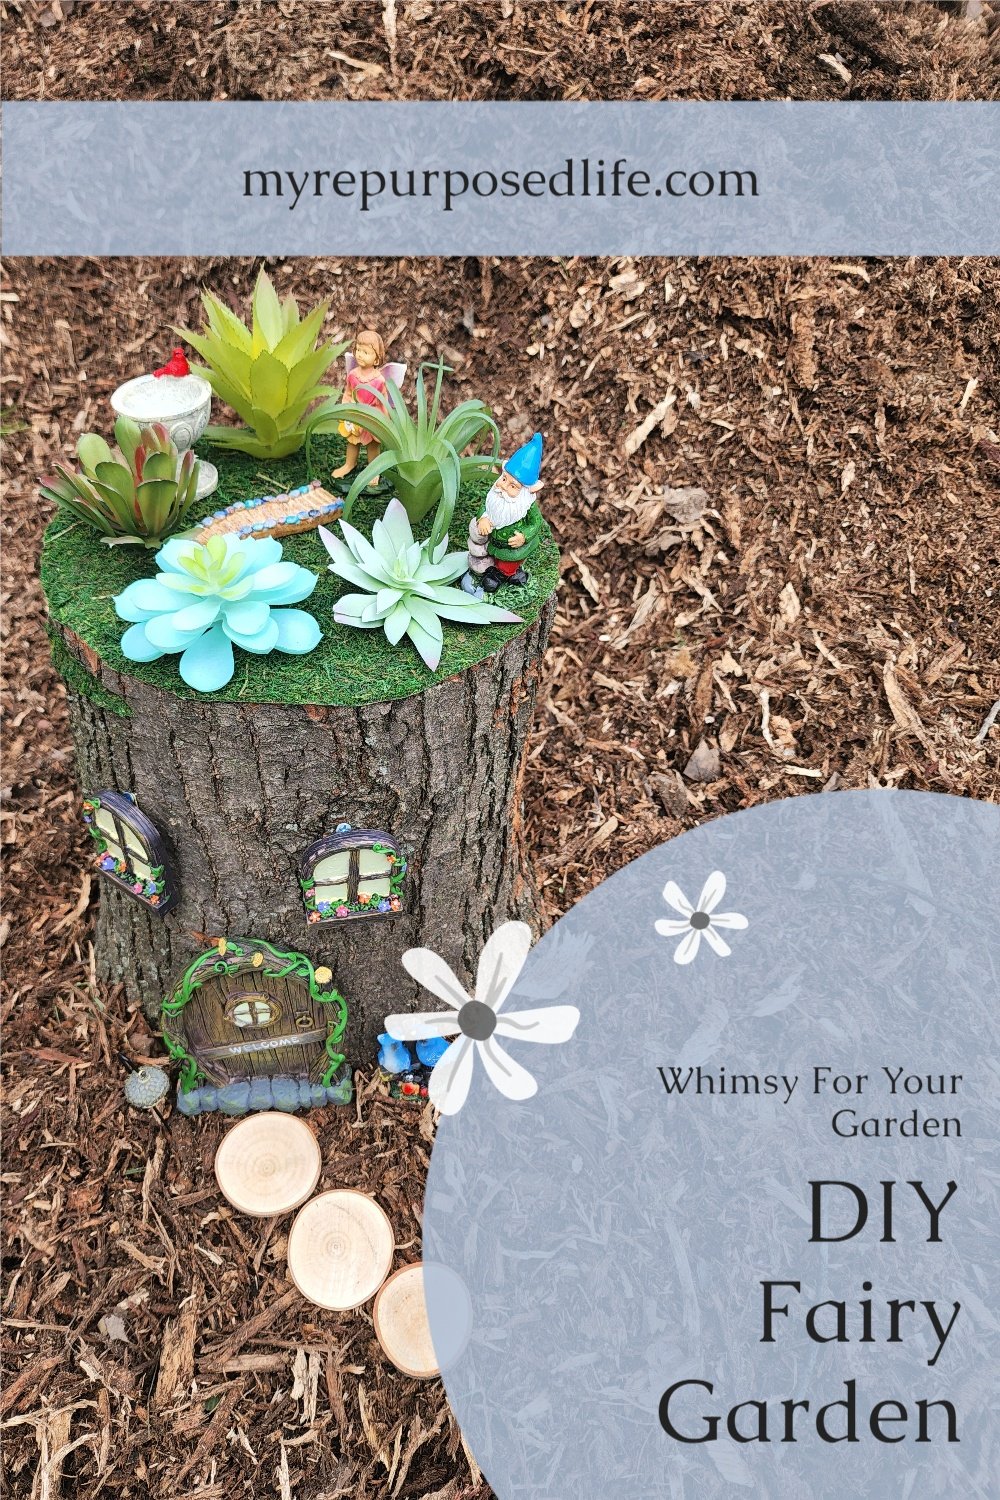 This so adorable fairy garden, tree stump, faux succulent project is perfect for your garden space or flower bed. Finding a tree stump may be easier than you think. Accessories came from the dollar store. #MyRepurposedLife #nationalgardeningday #fairygarden #garden #whimsical #decor via @repurposedlife